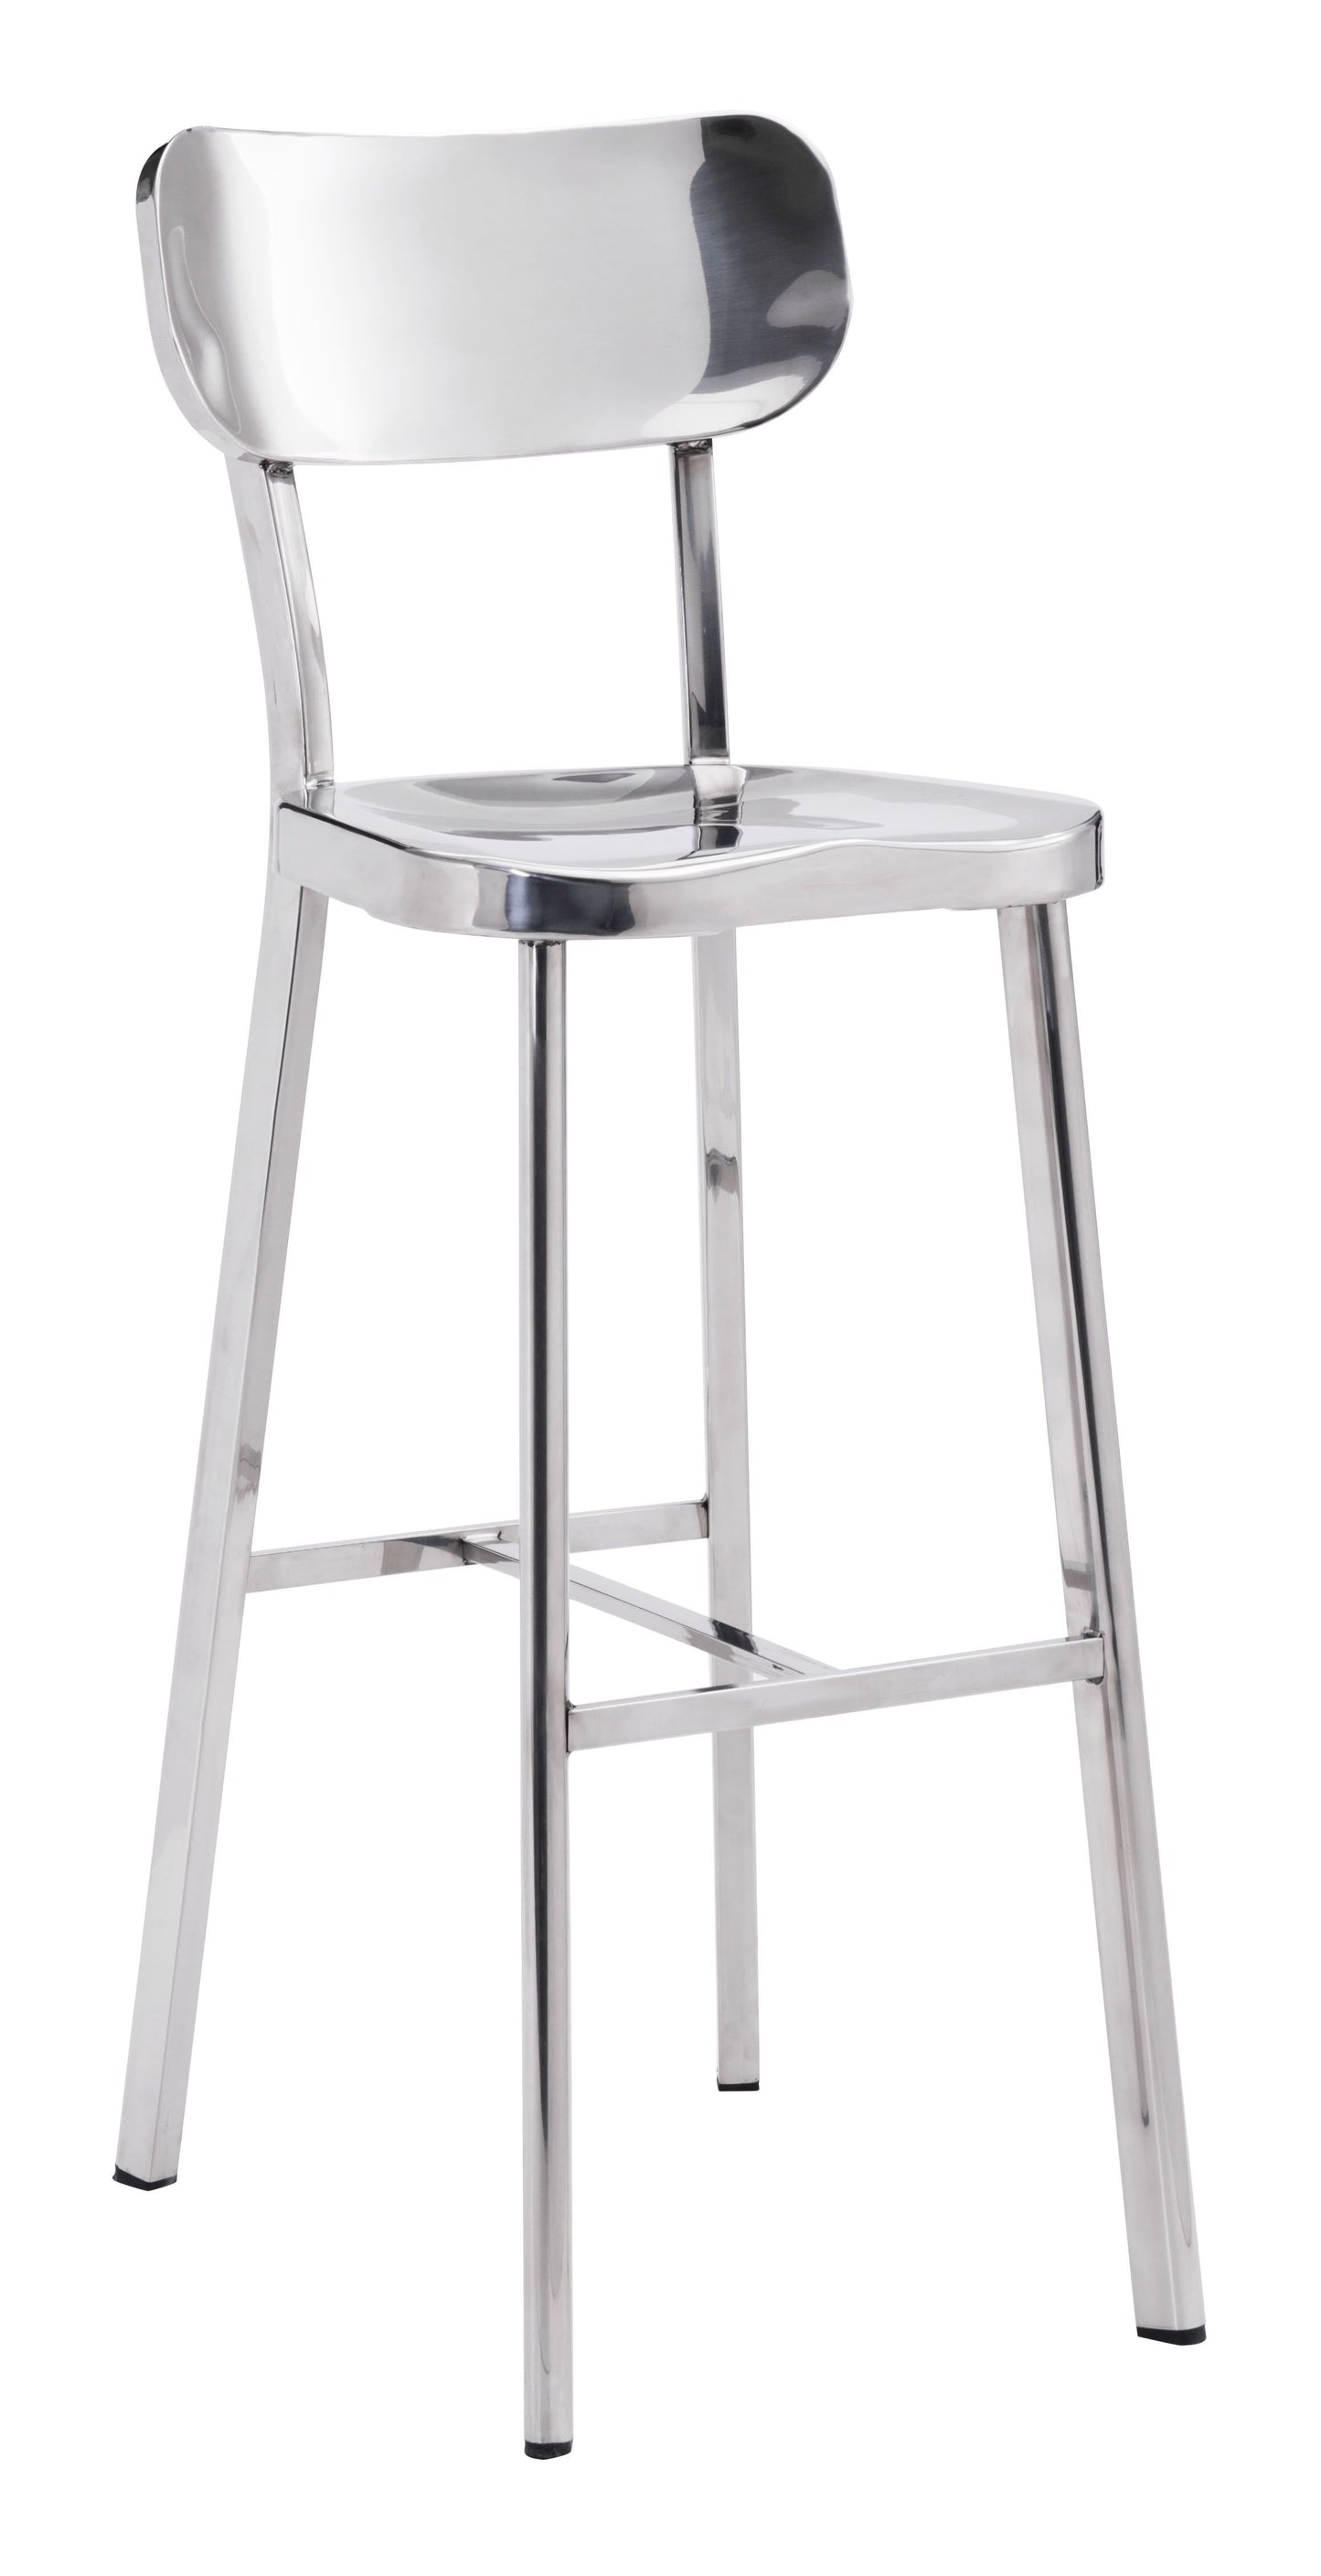 Winter Bar Chair Polished Stainless Steel